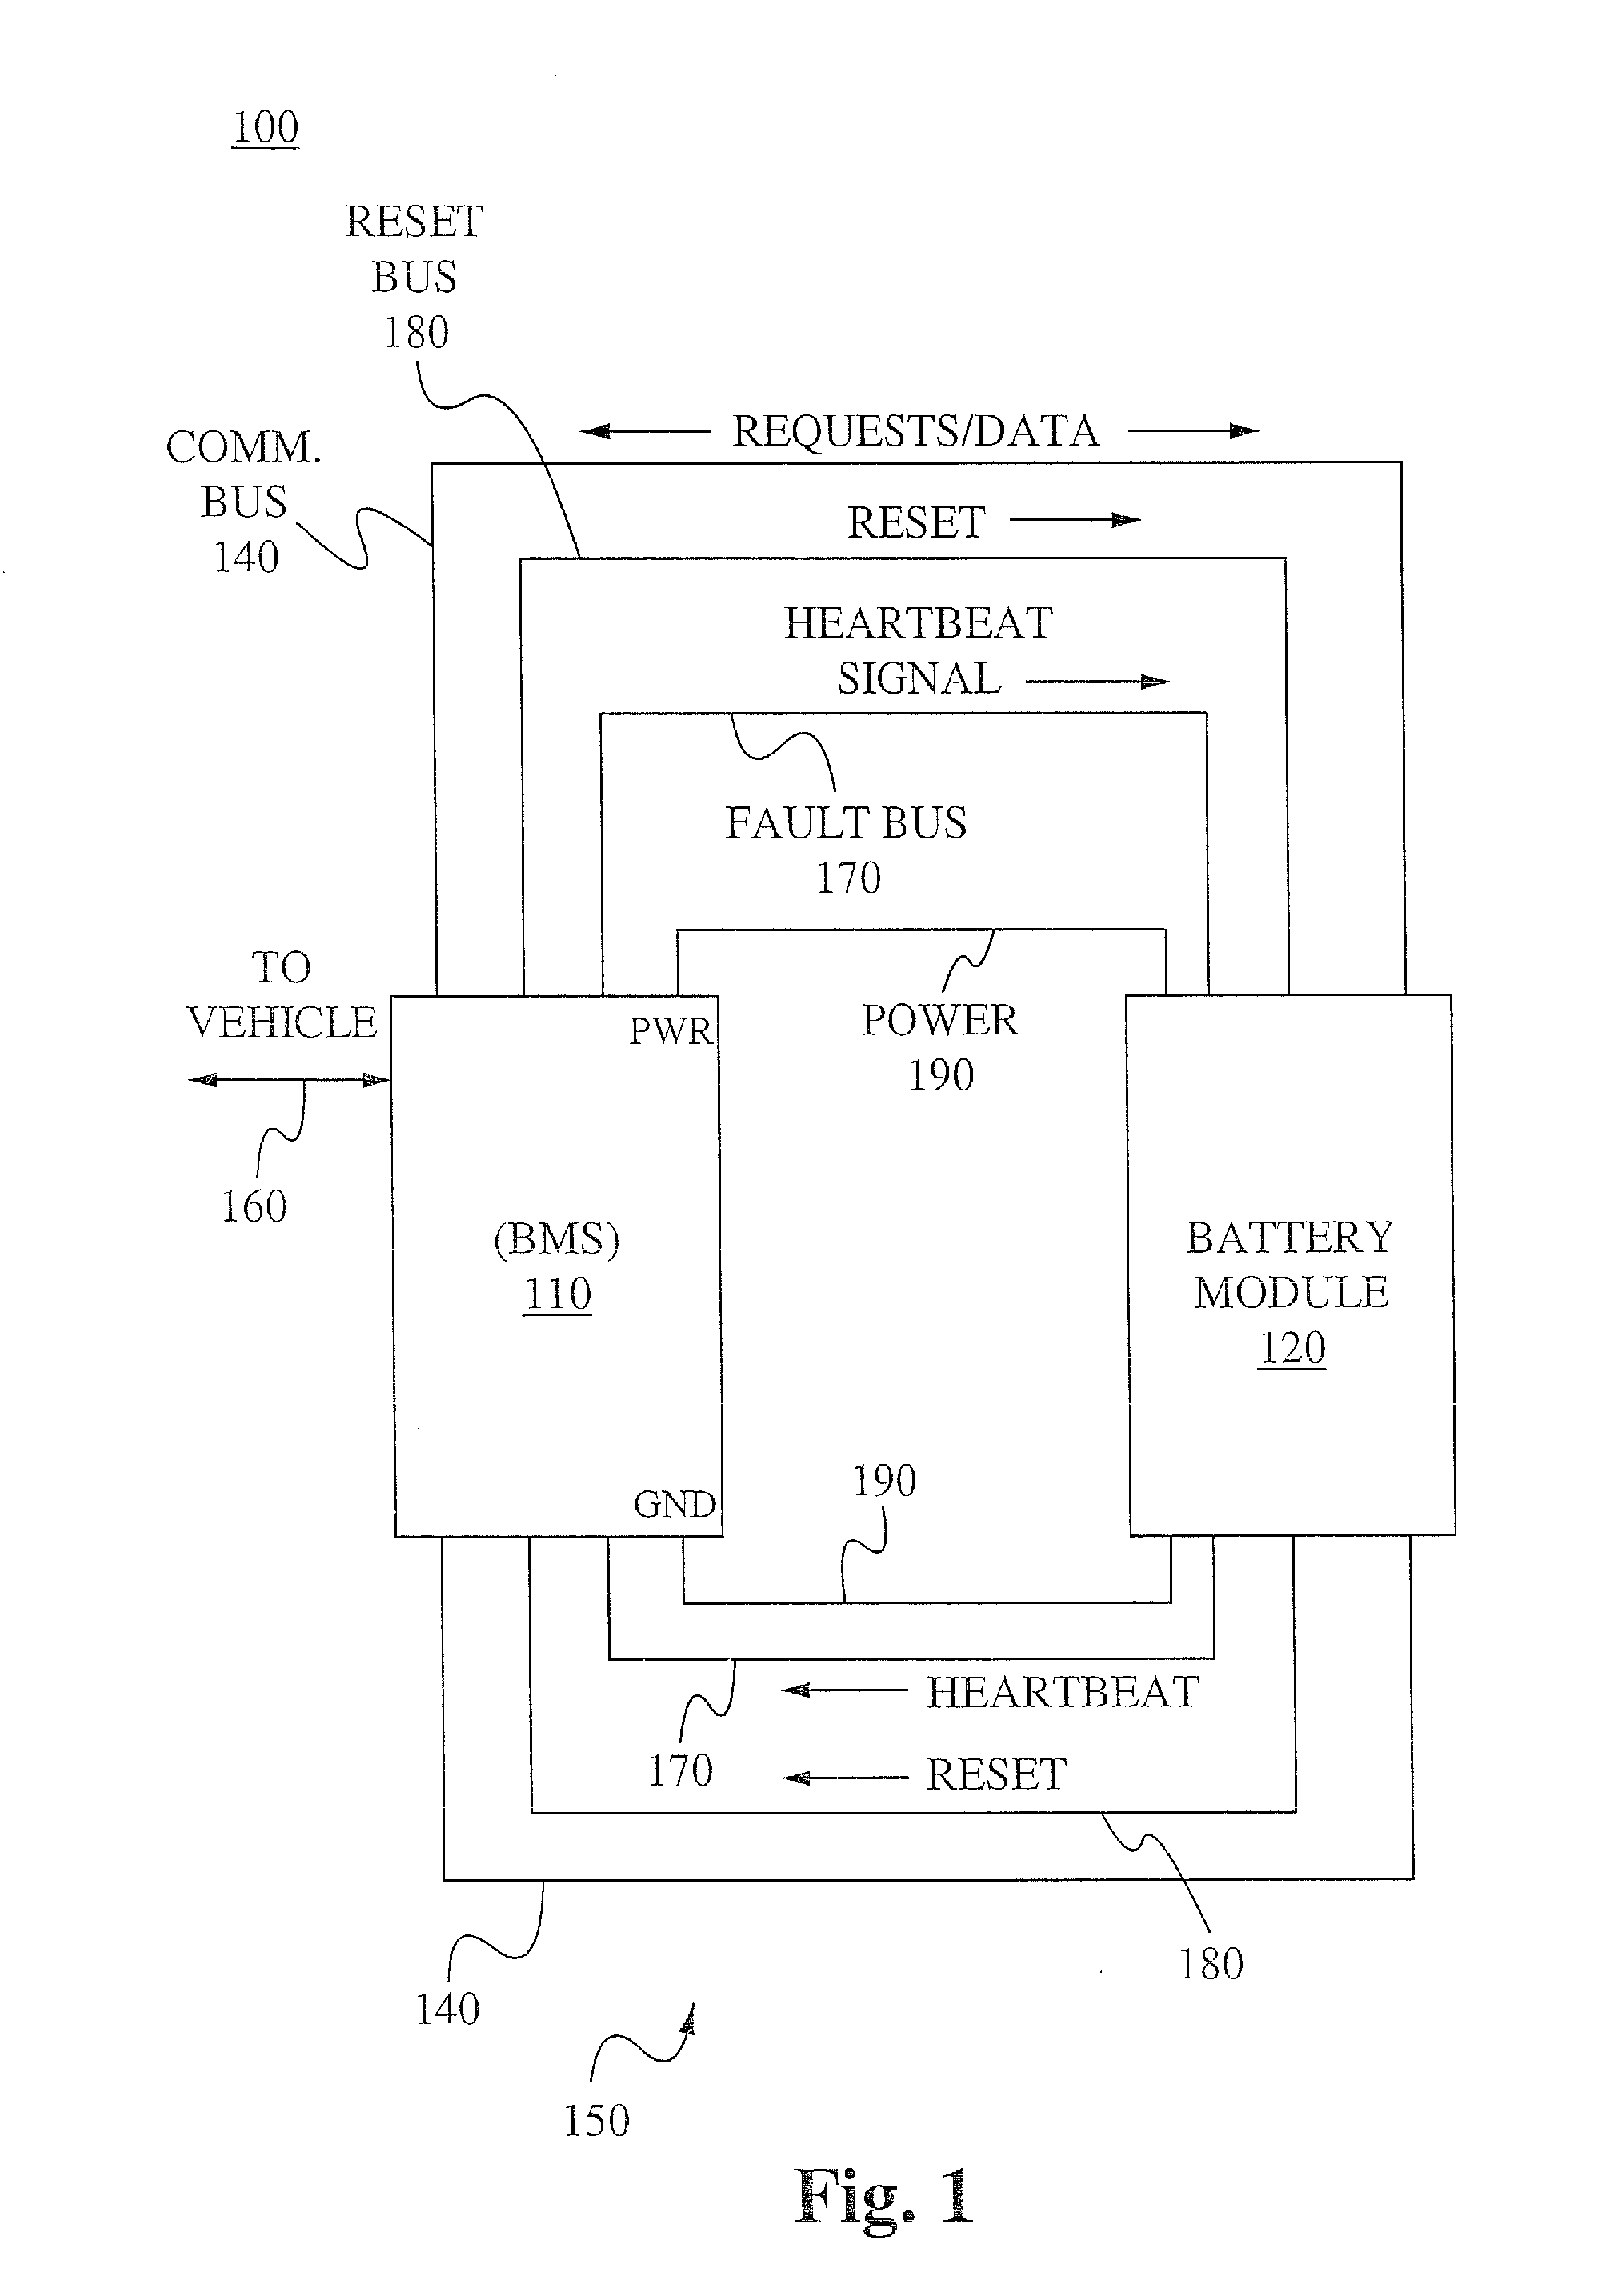 Battery pack fault communication and handling